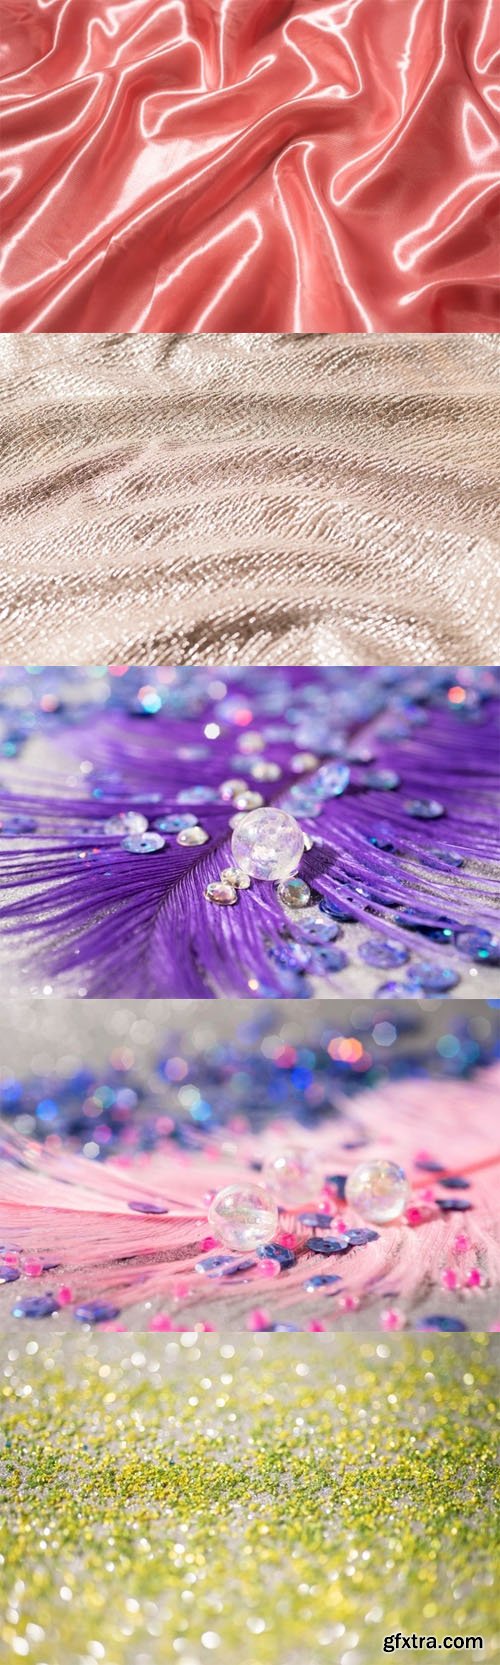 15 Awesome Sparks and Glitters Photos Collection